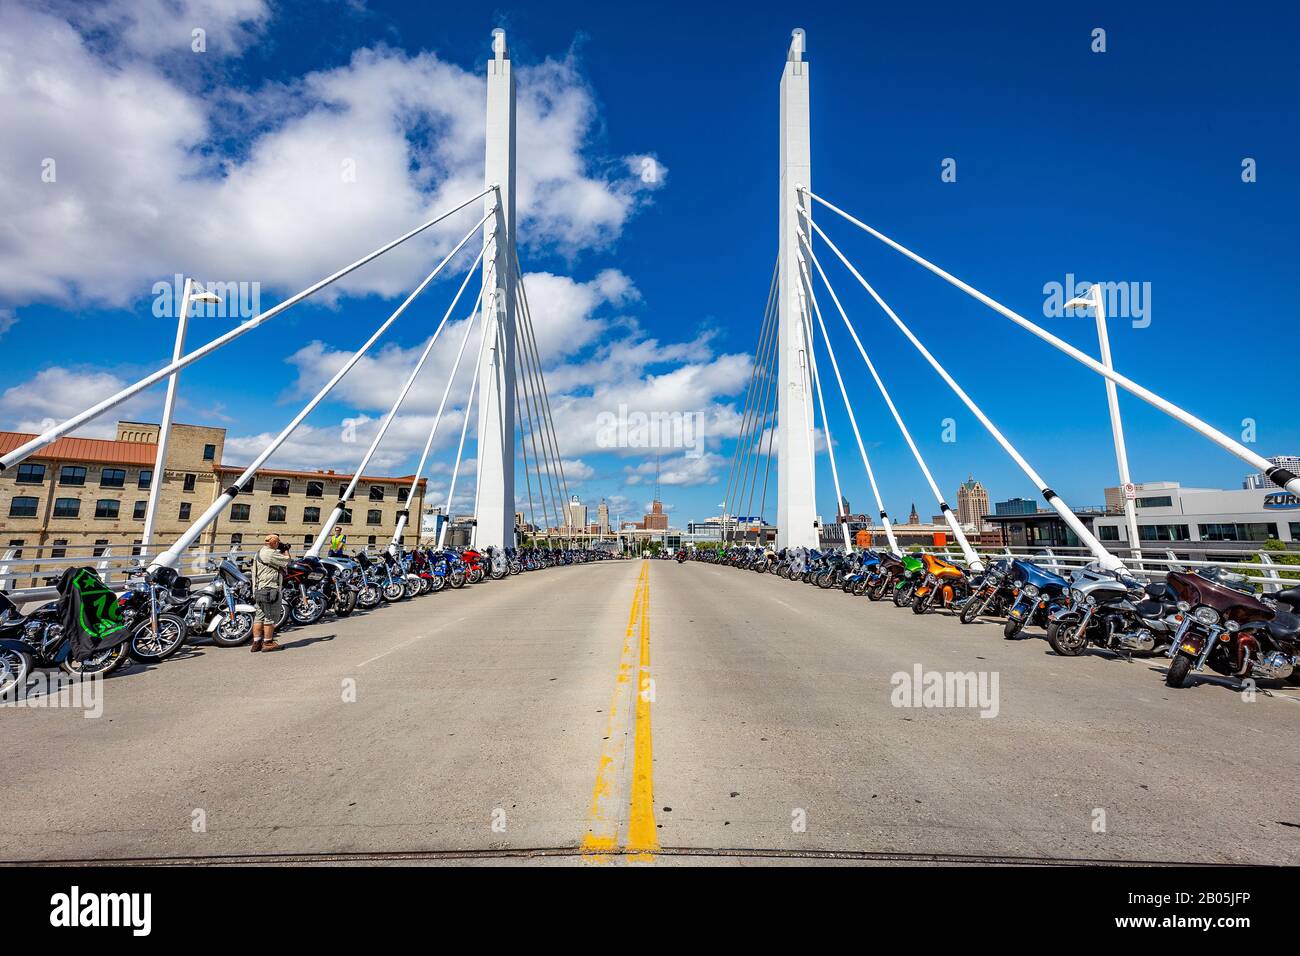 MILWAUKEE, WISCONSIN /UNITED STATES OF AMERIRCA - AUGUST 30, 2018: Outside Harley-Davidson Museum during the 115th anniversary celebration. Stock Photo